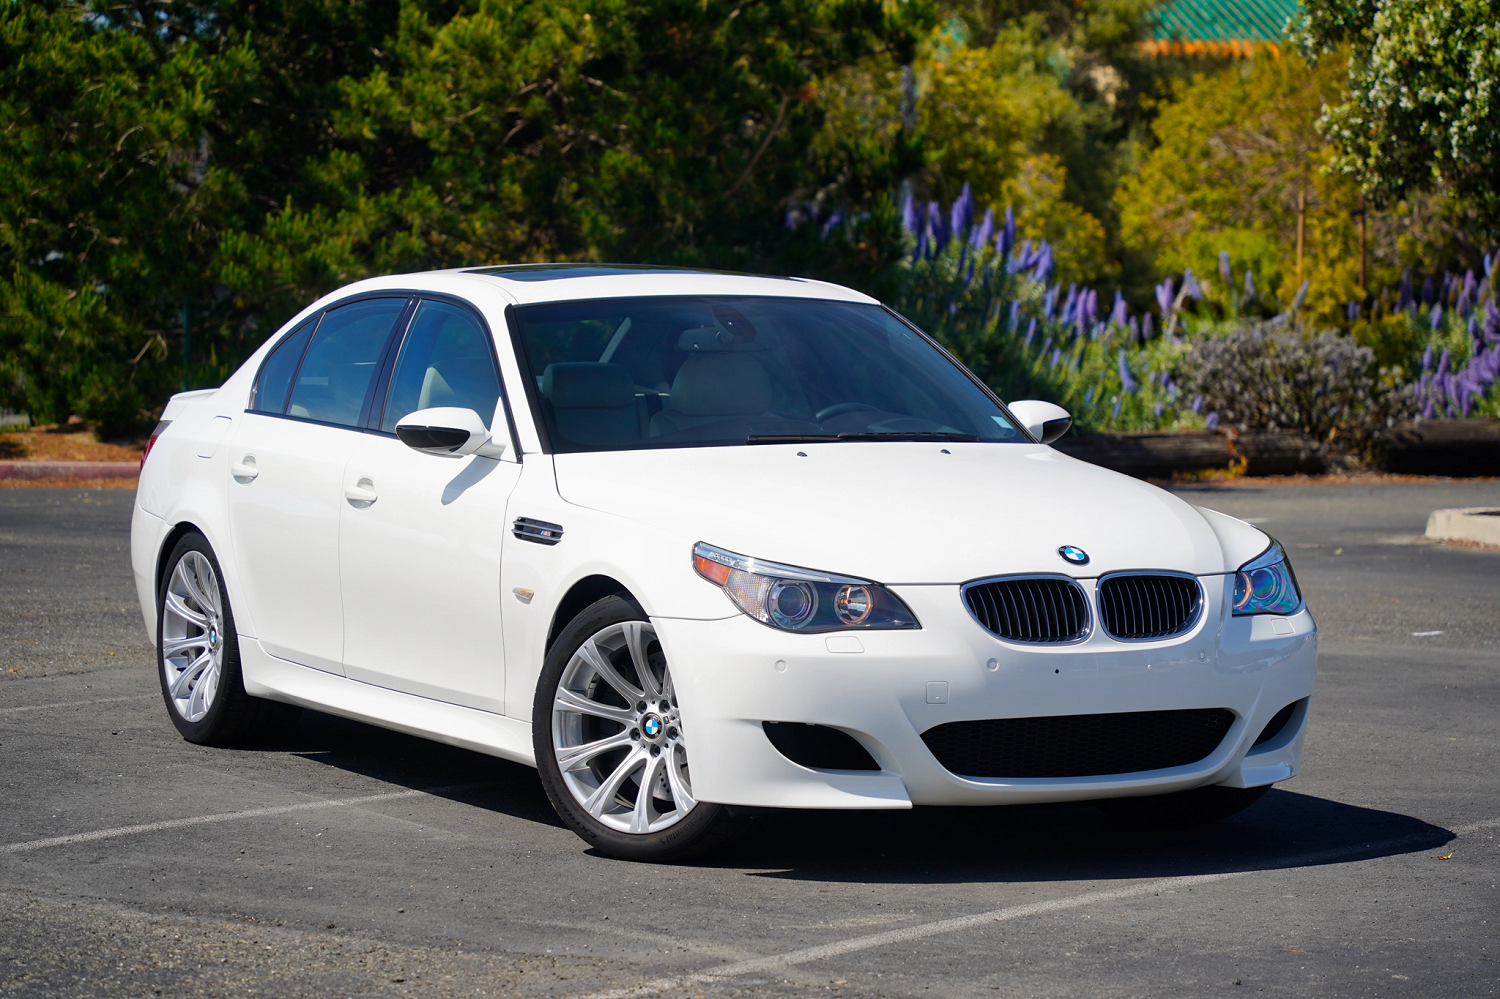 A 2006 BMW E60 M5 parked outside in sun